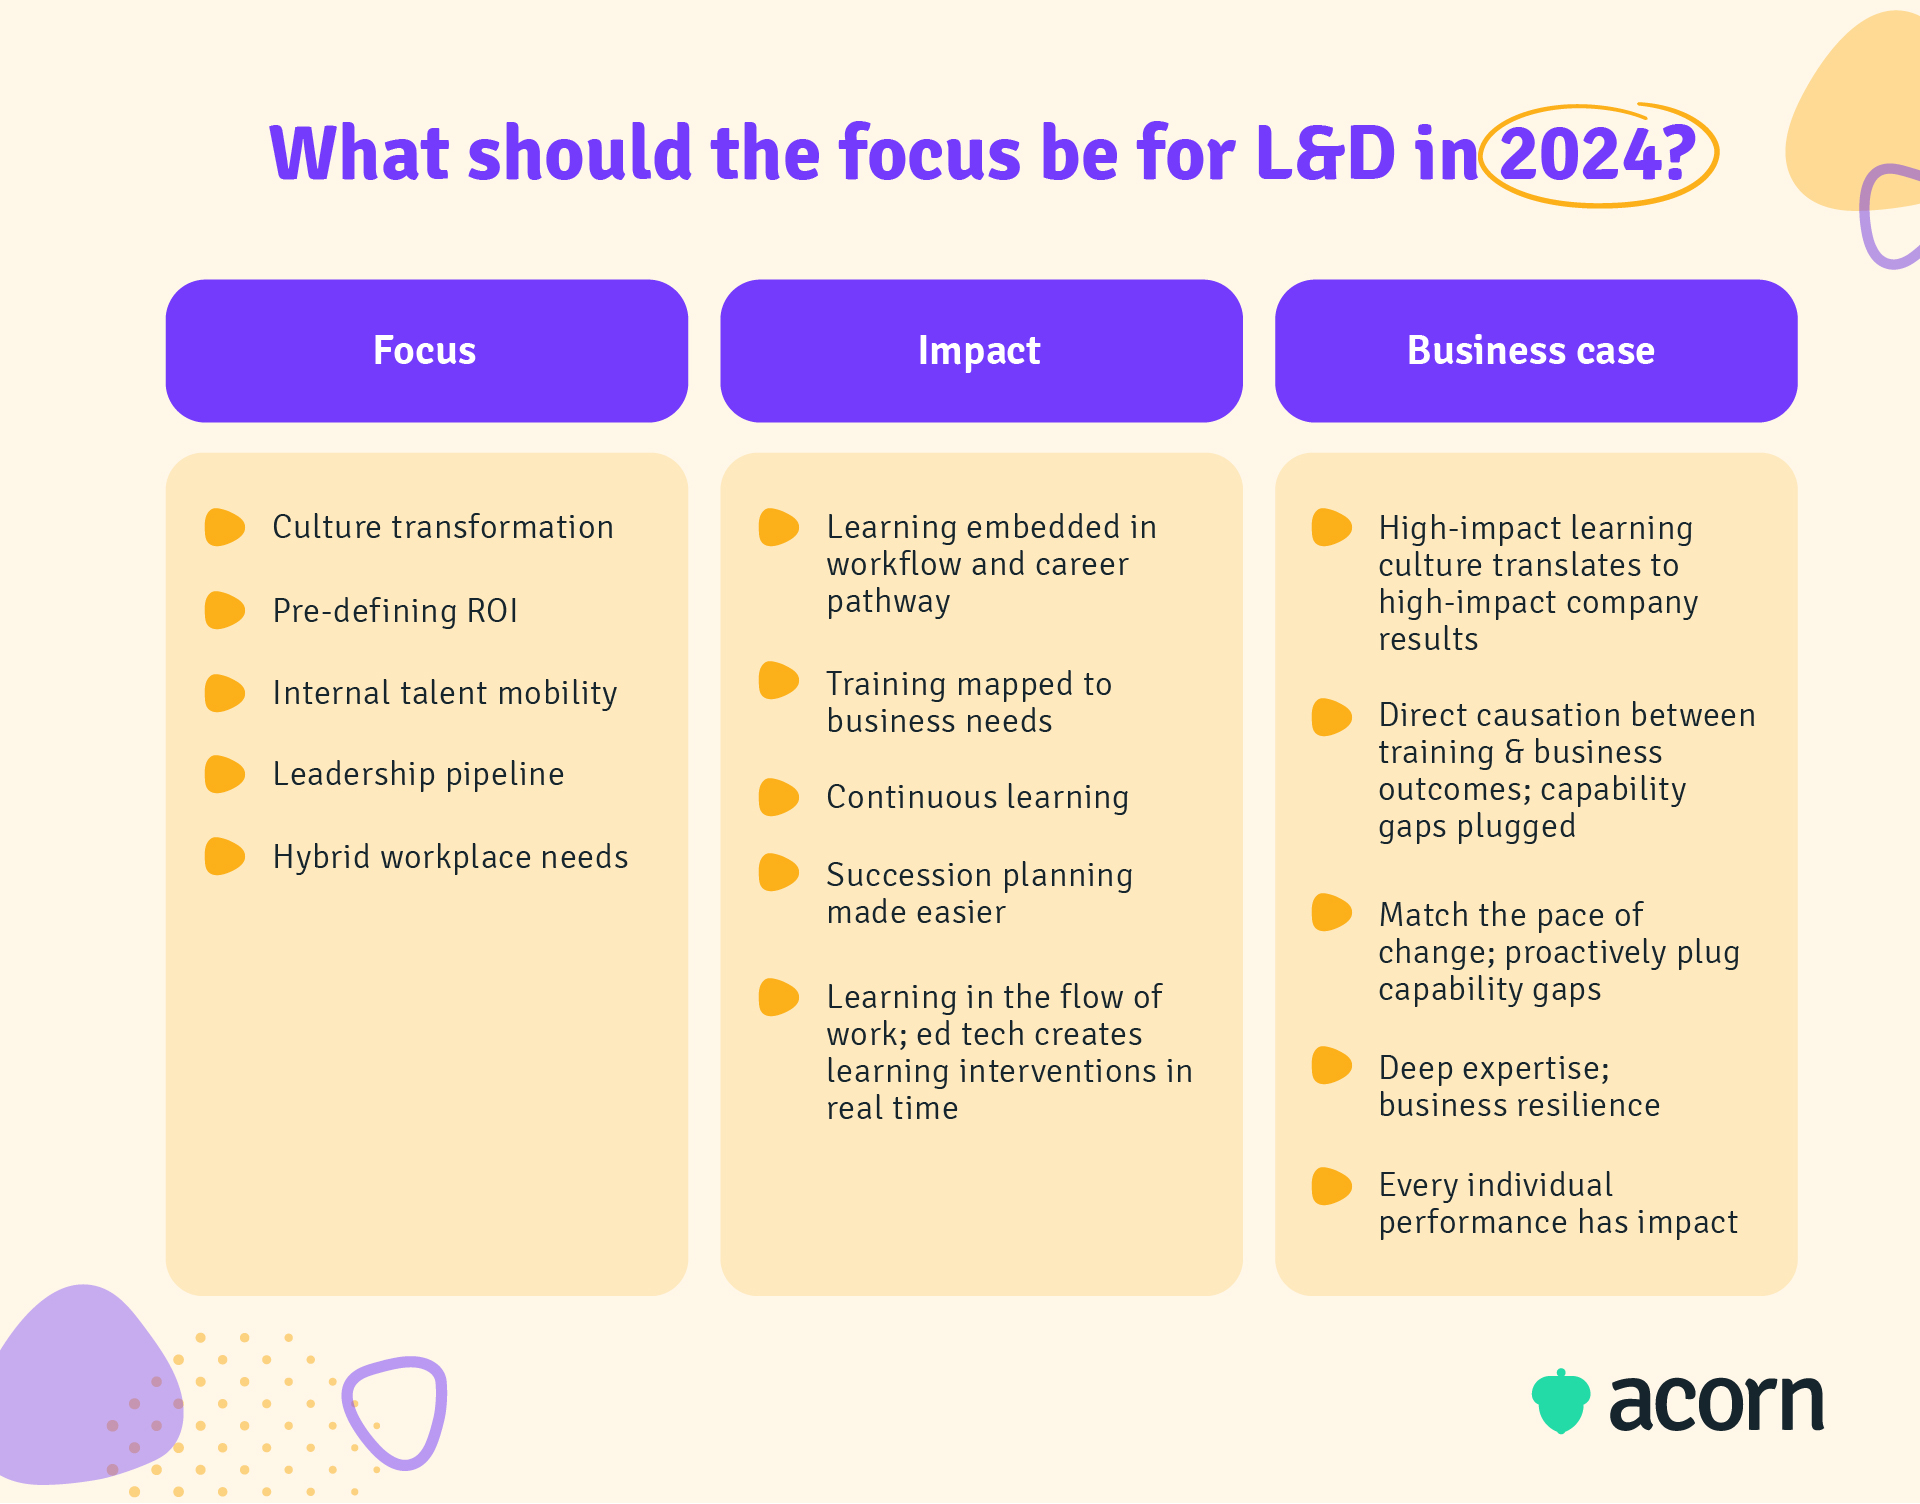 Table showing how to translate L&D focus to impact and business case